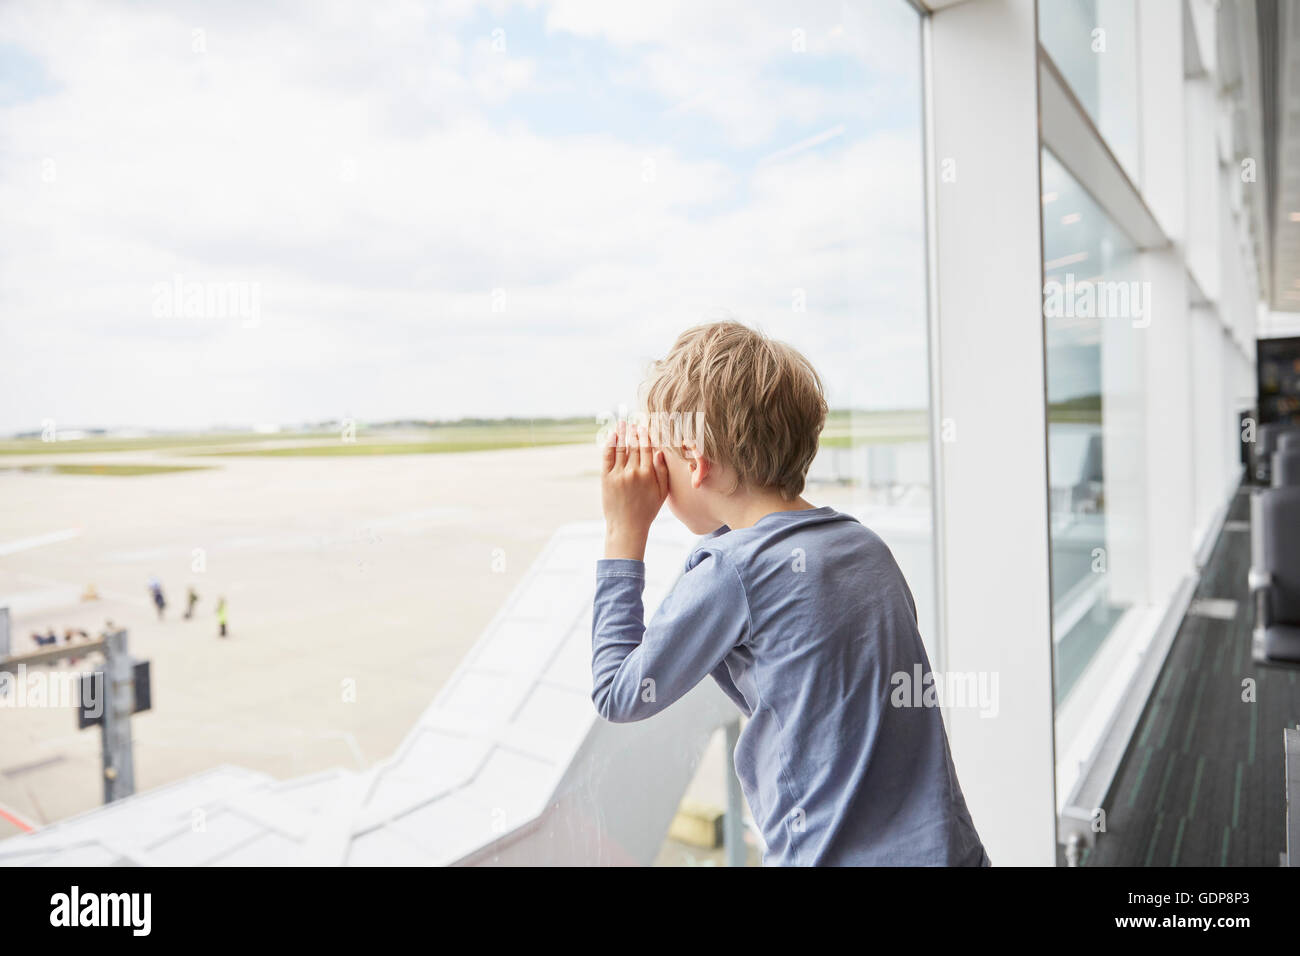 Boy looking out of airport window at runway Stock Photo